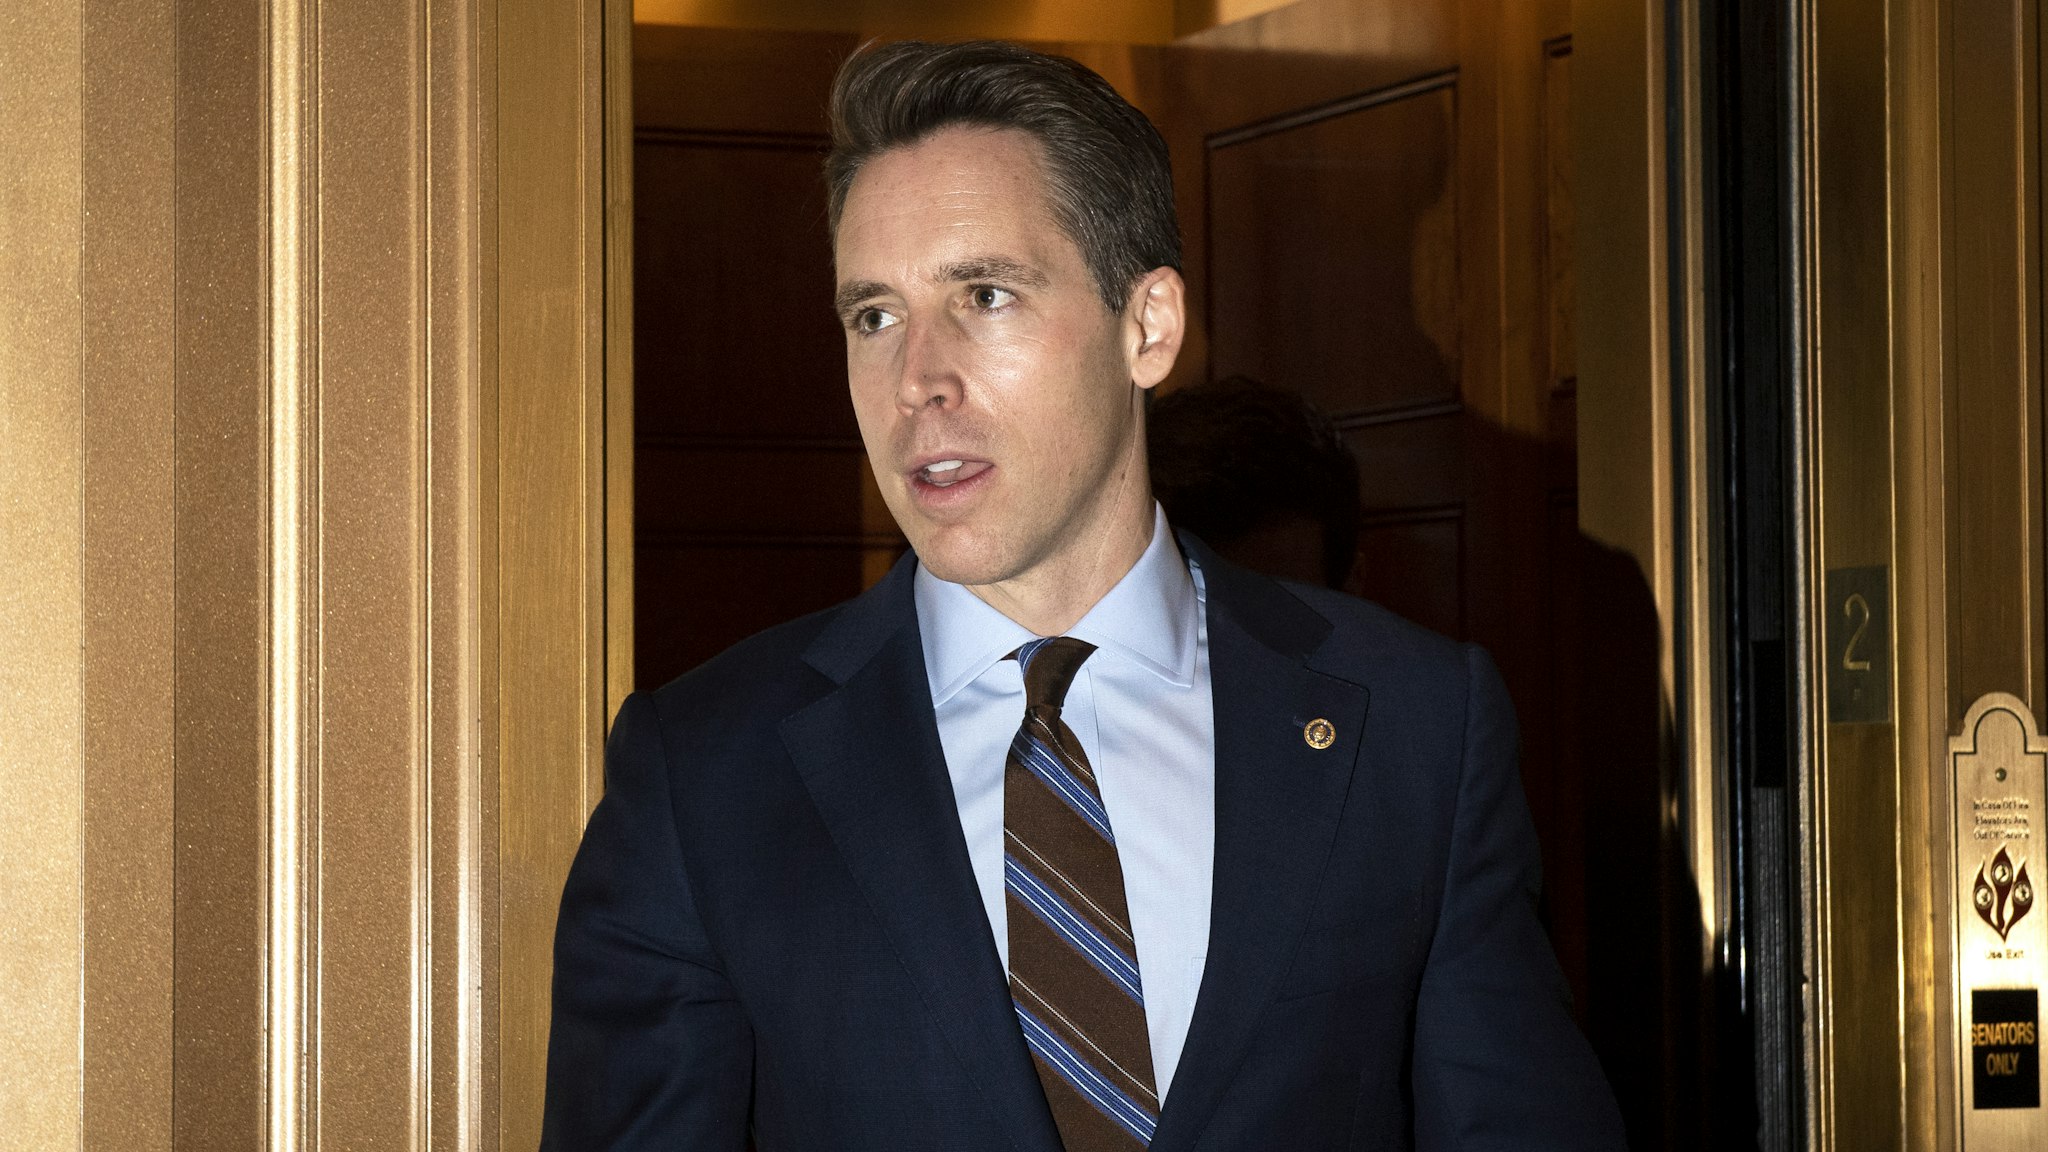 OCTOBER 29: Sen. Josh Hawley, R-Mo., makes his way to the Senate Republicans lunch in the Capitol on Tuesday Oct. 29, 2019.